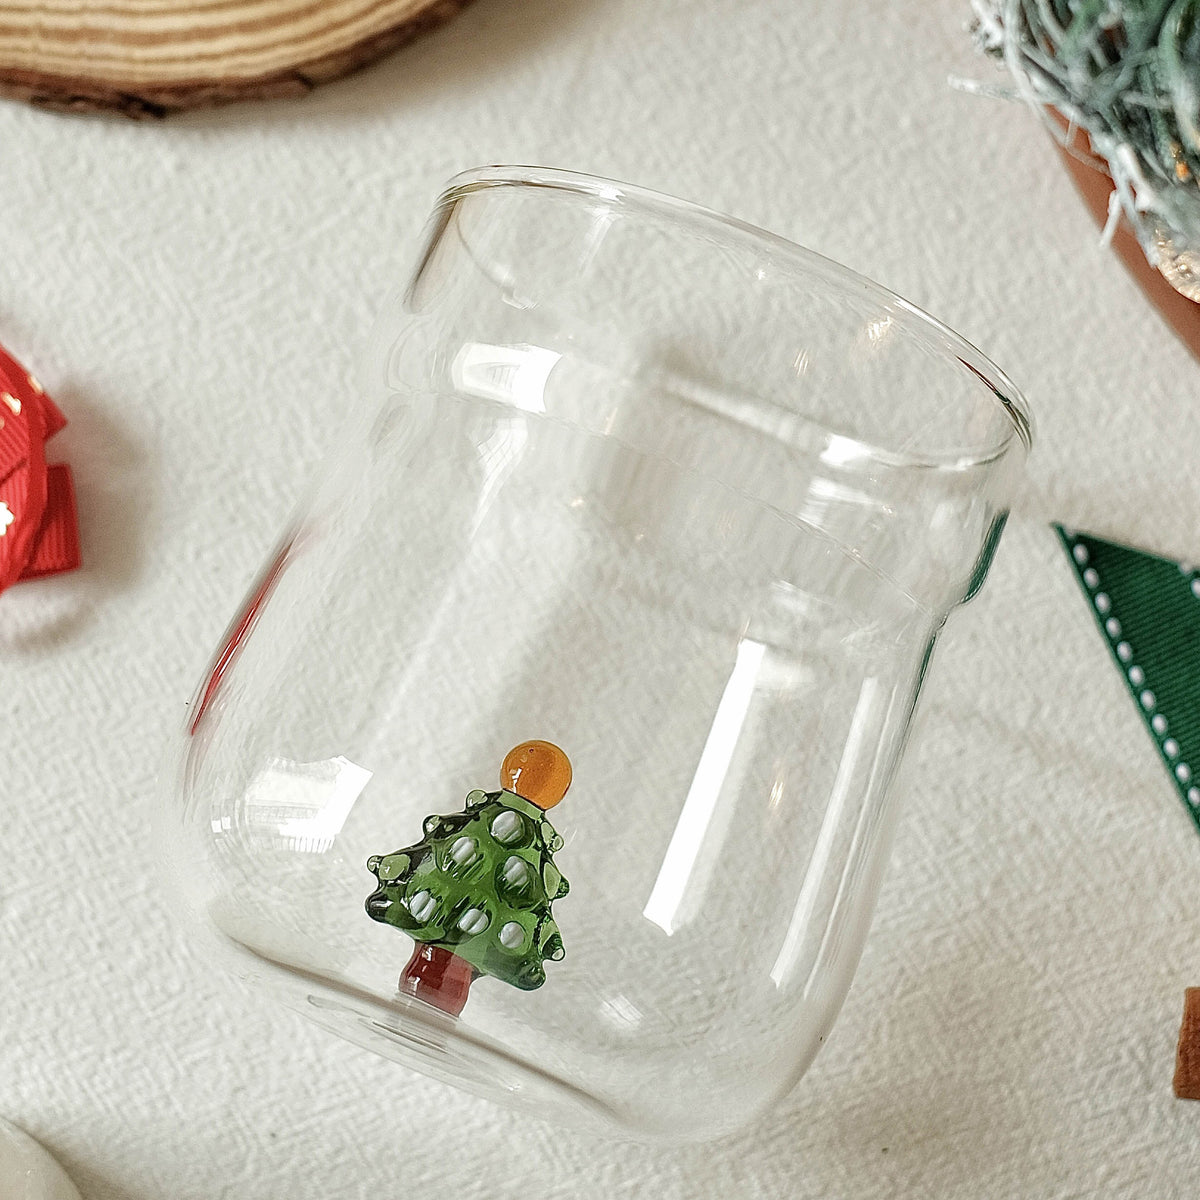 Cute Cartoon 3D Christmas Tree High Borosilicate Glass Cup - Unique Gift for Coffee, Milk, and Holiday Drinks